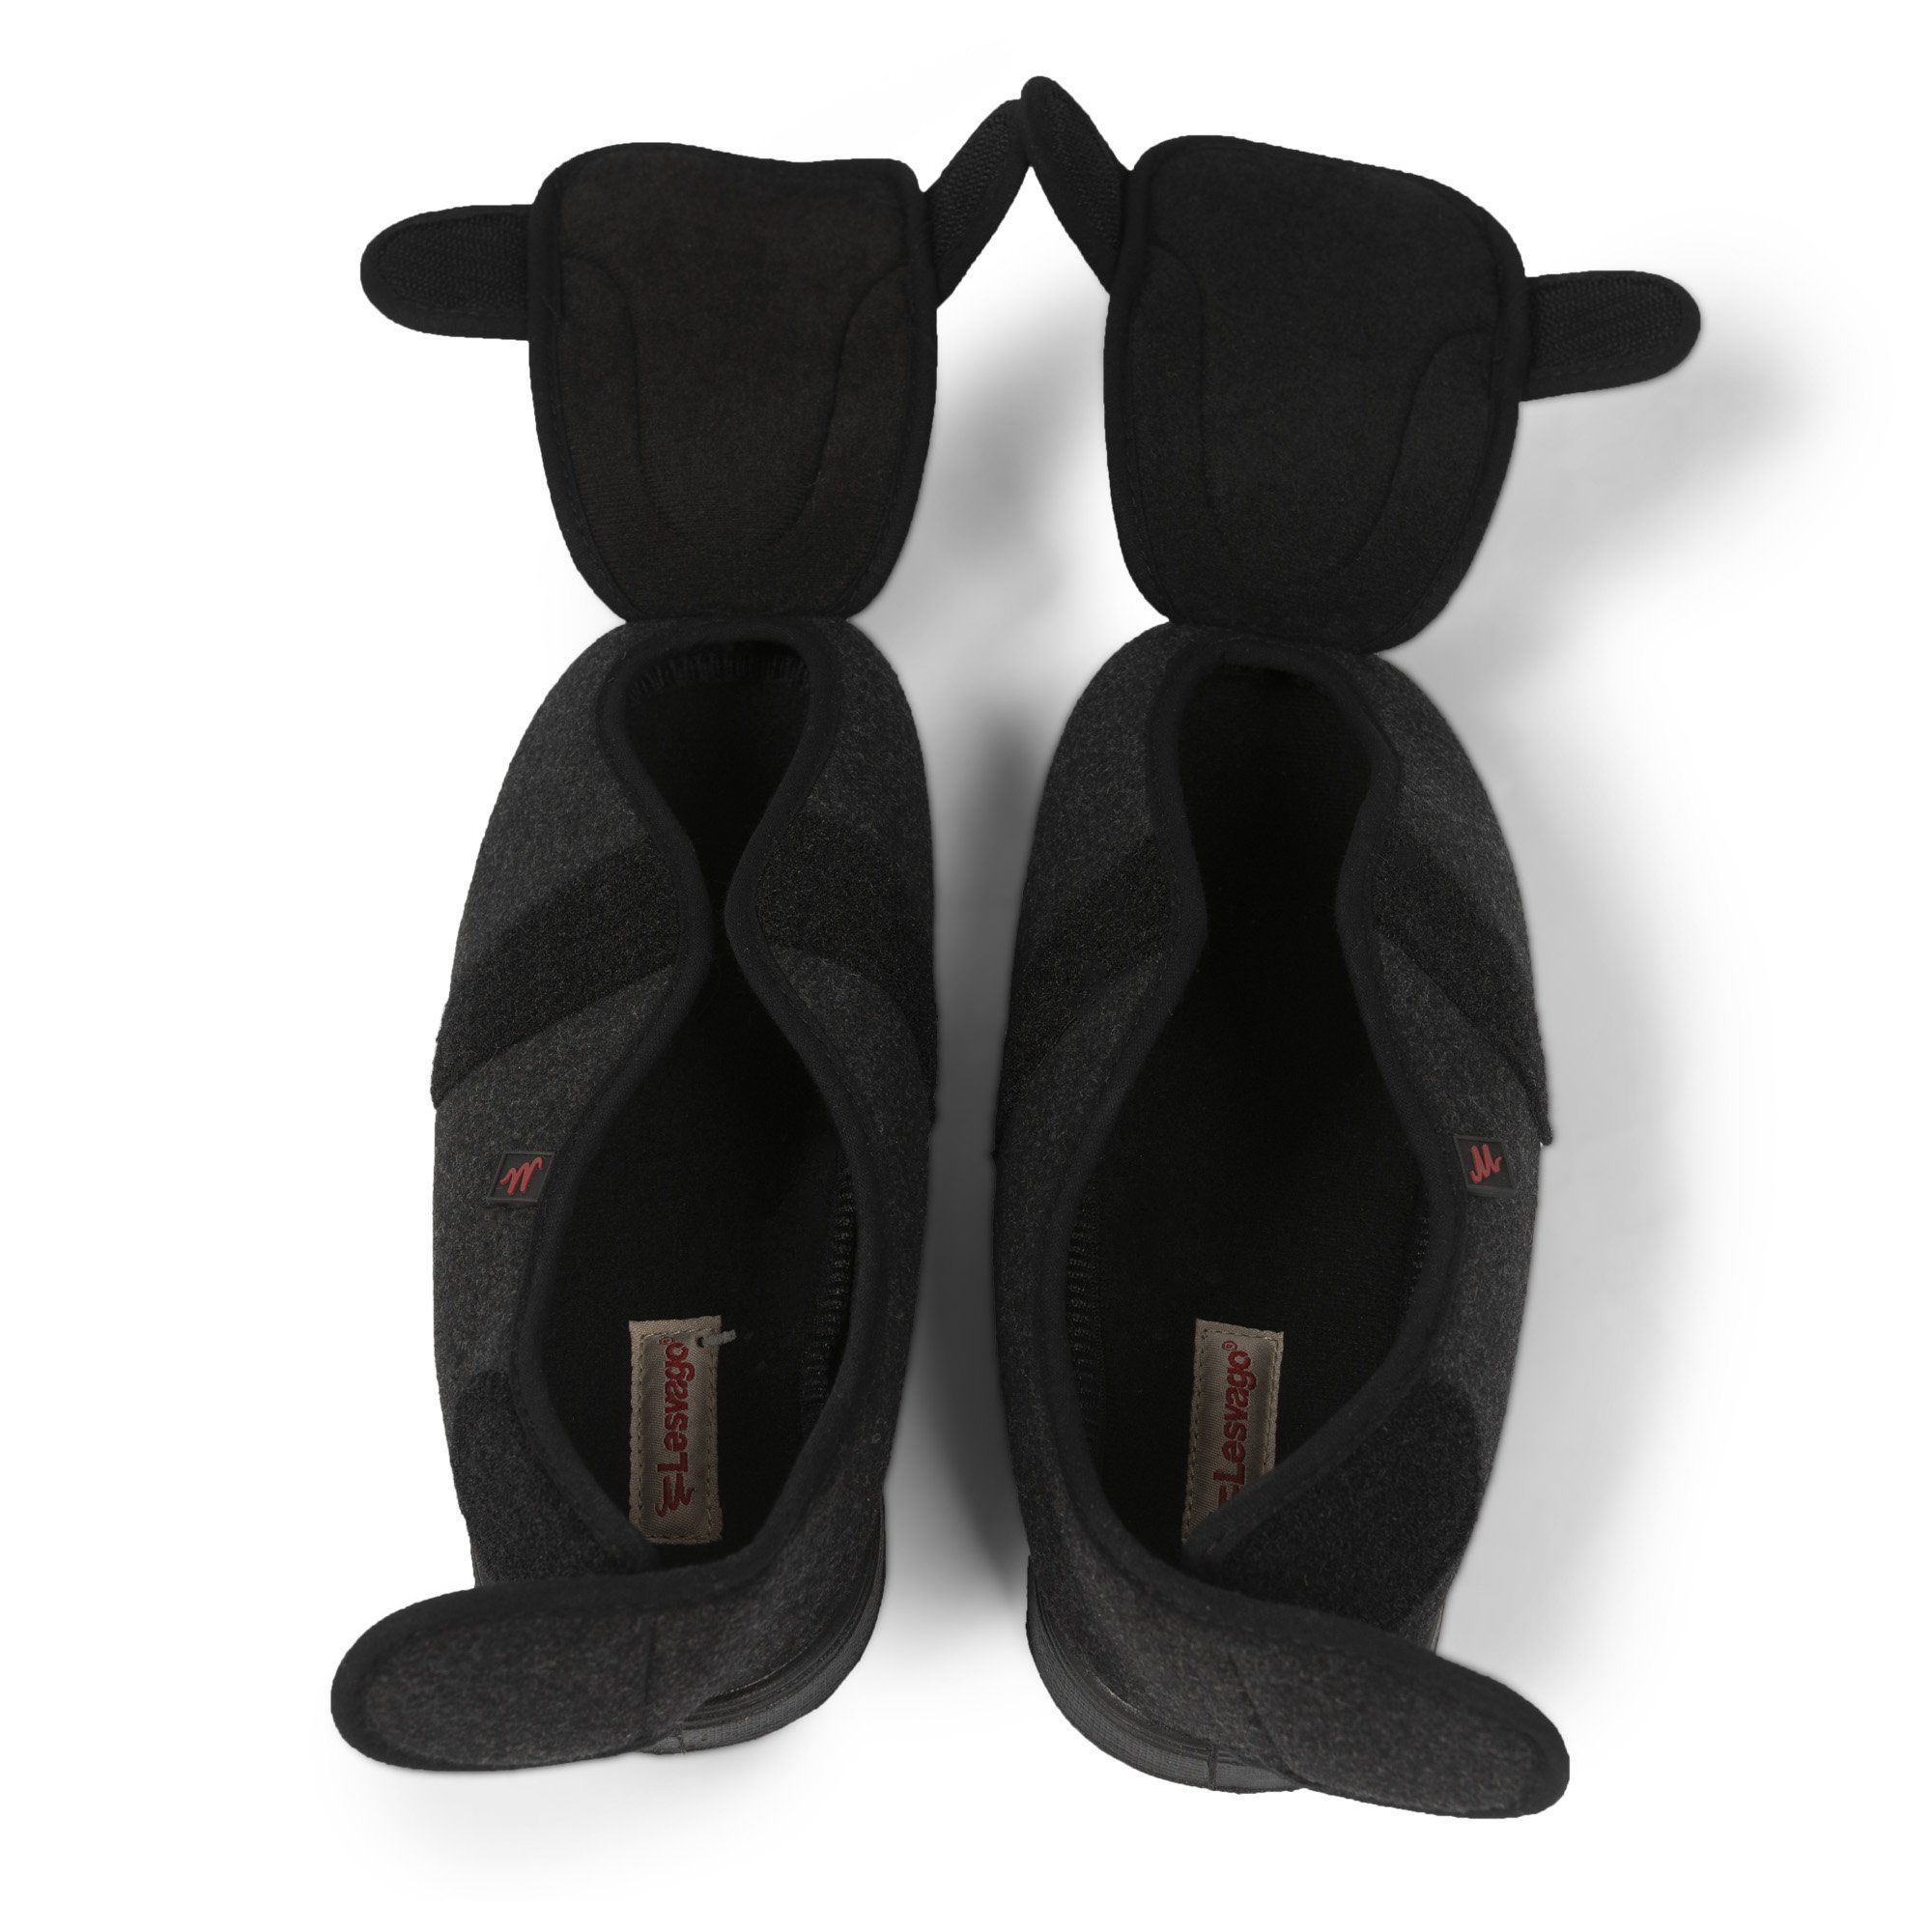 dunimed lesvago bandage shoes black pictured from above and opened